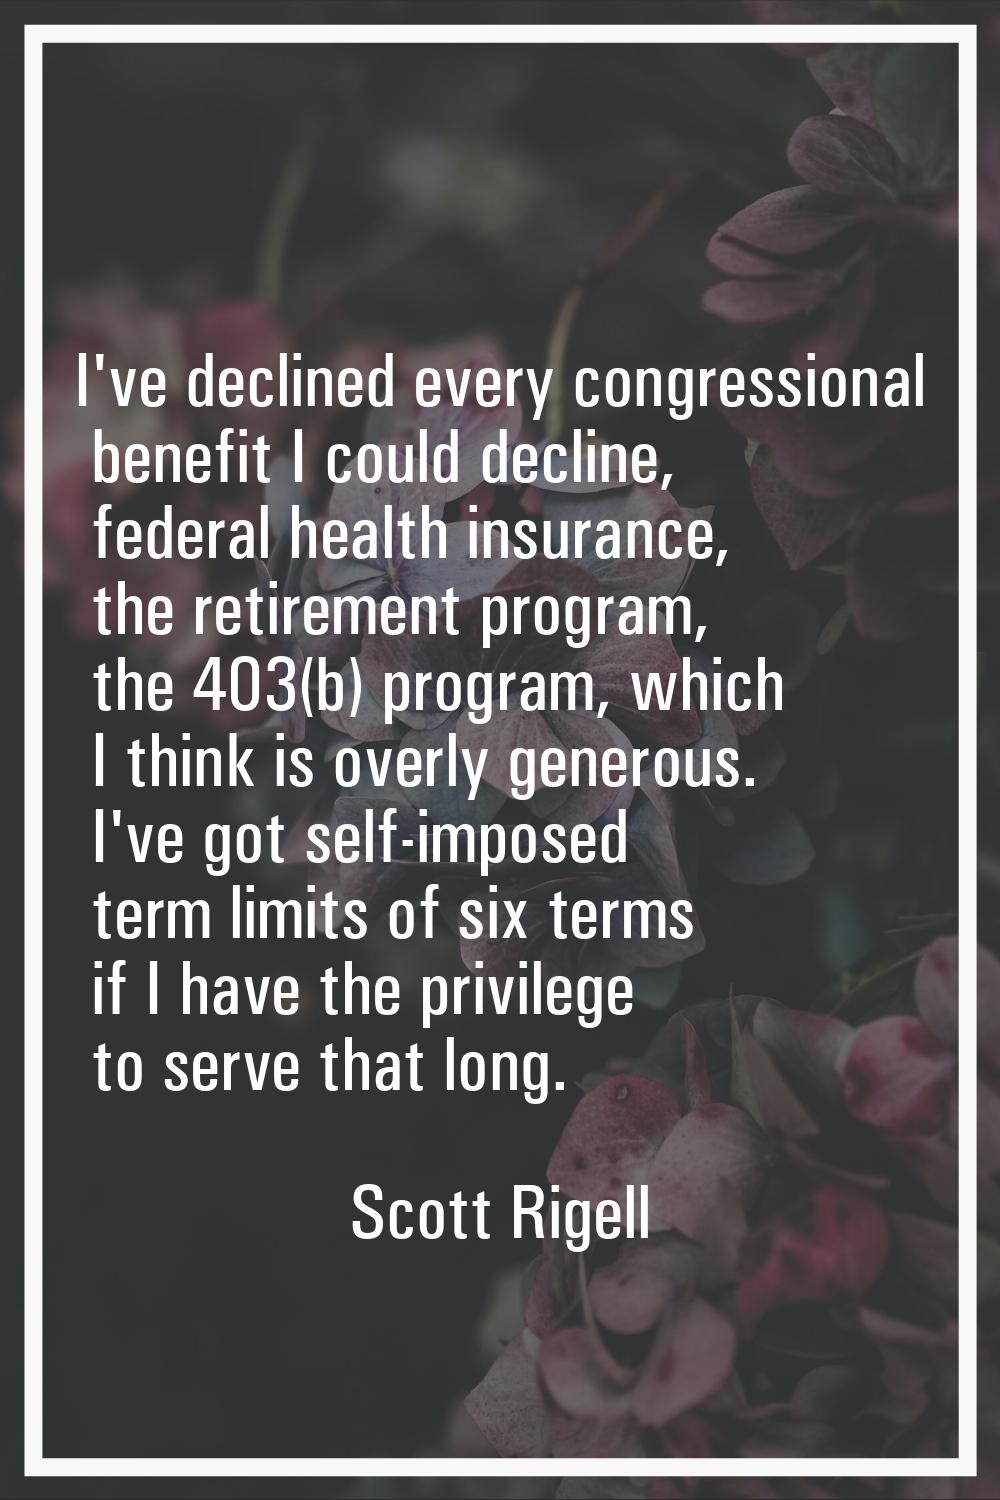 I've declined every congressional benefit I could decline, federal health insurance, the retirement